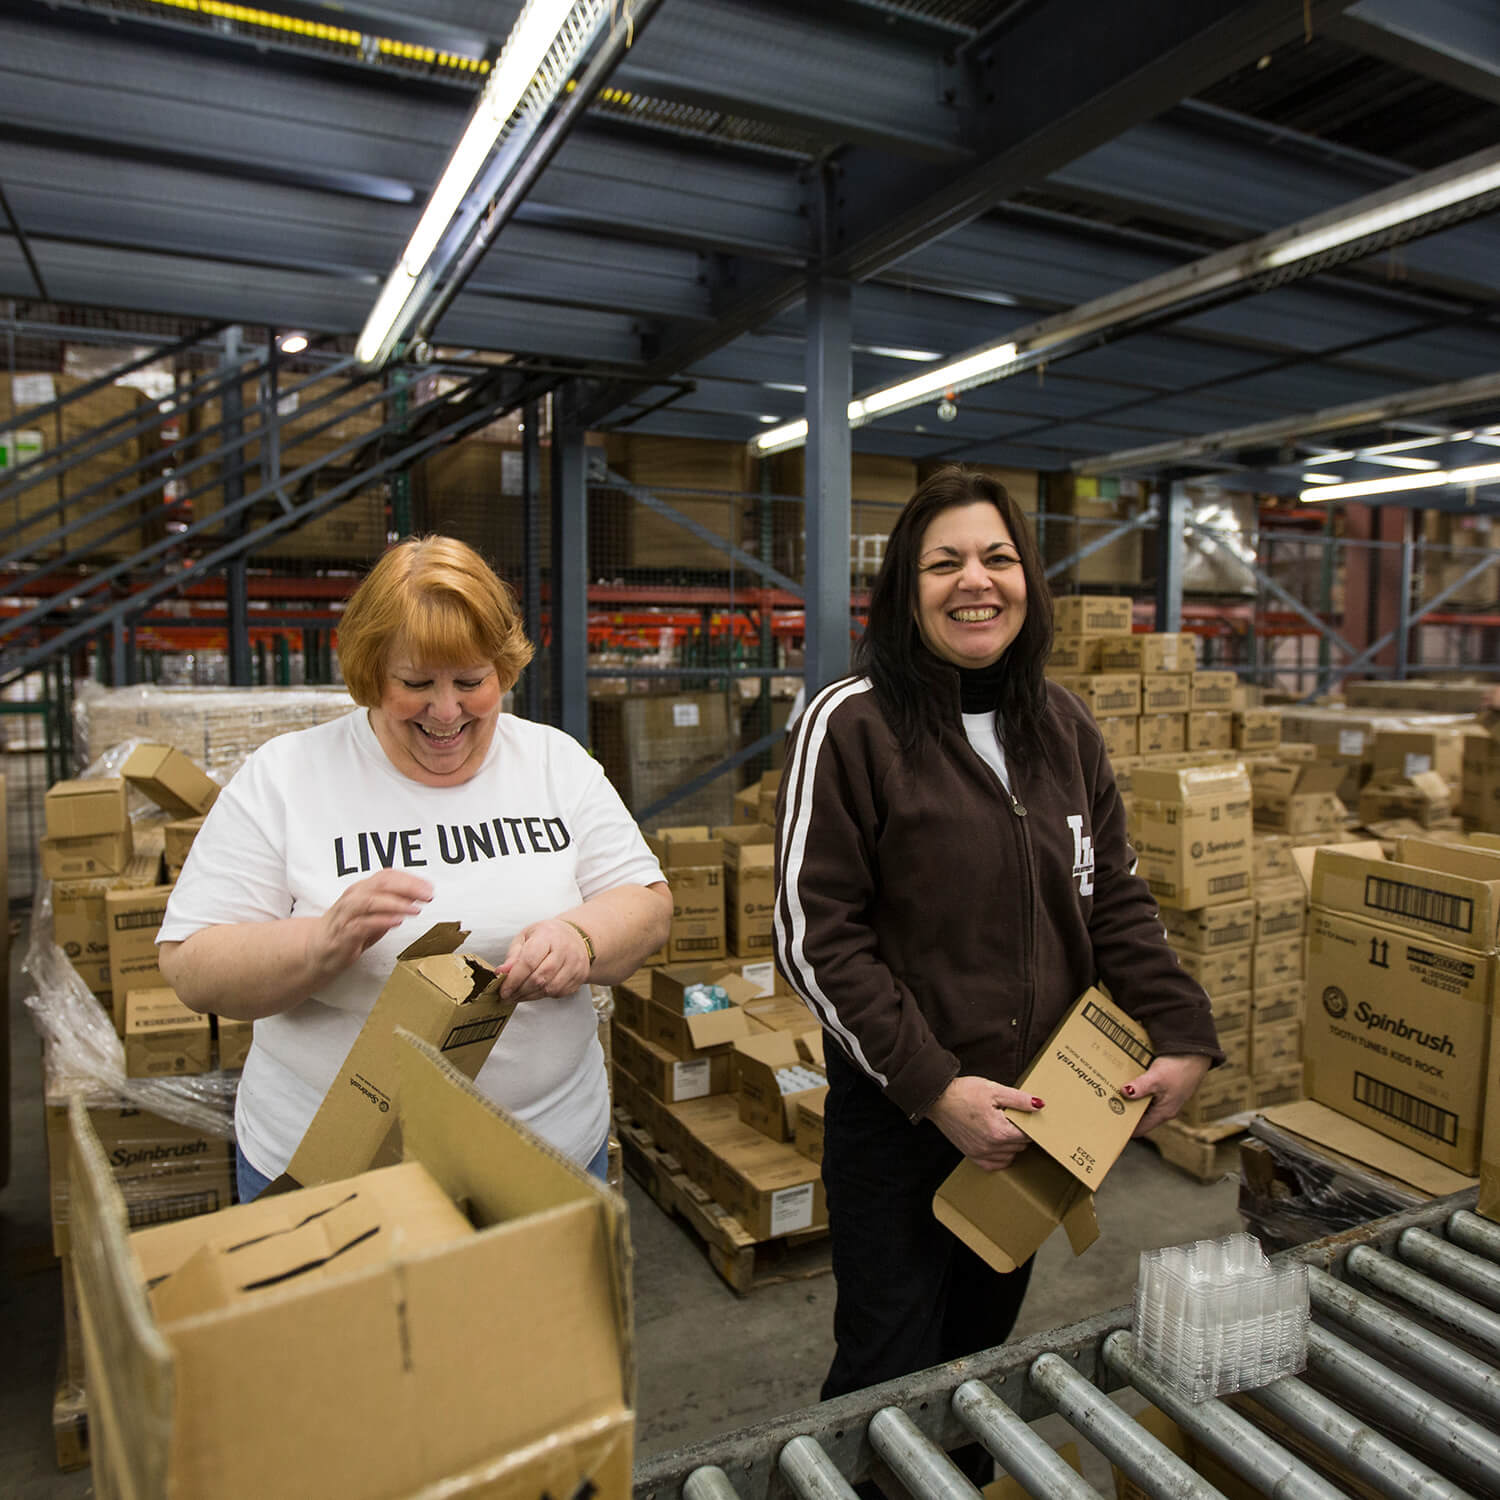 Two women dressed in Lehigh clothing smile as they help with boxing in a warehouse. 